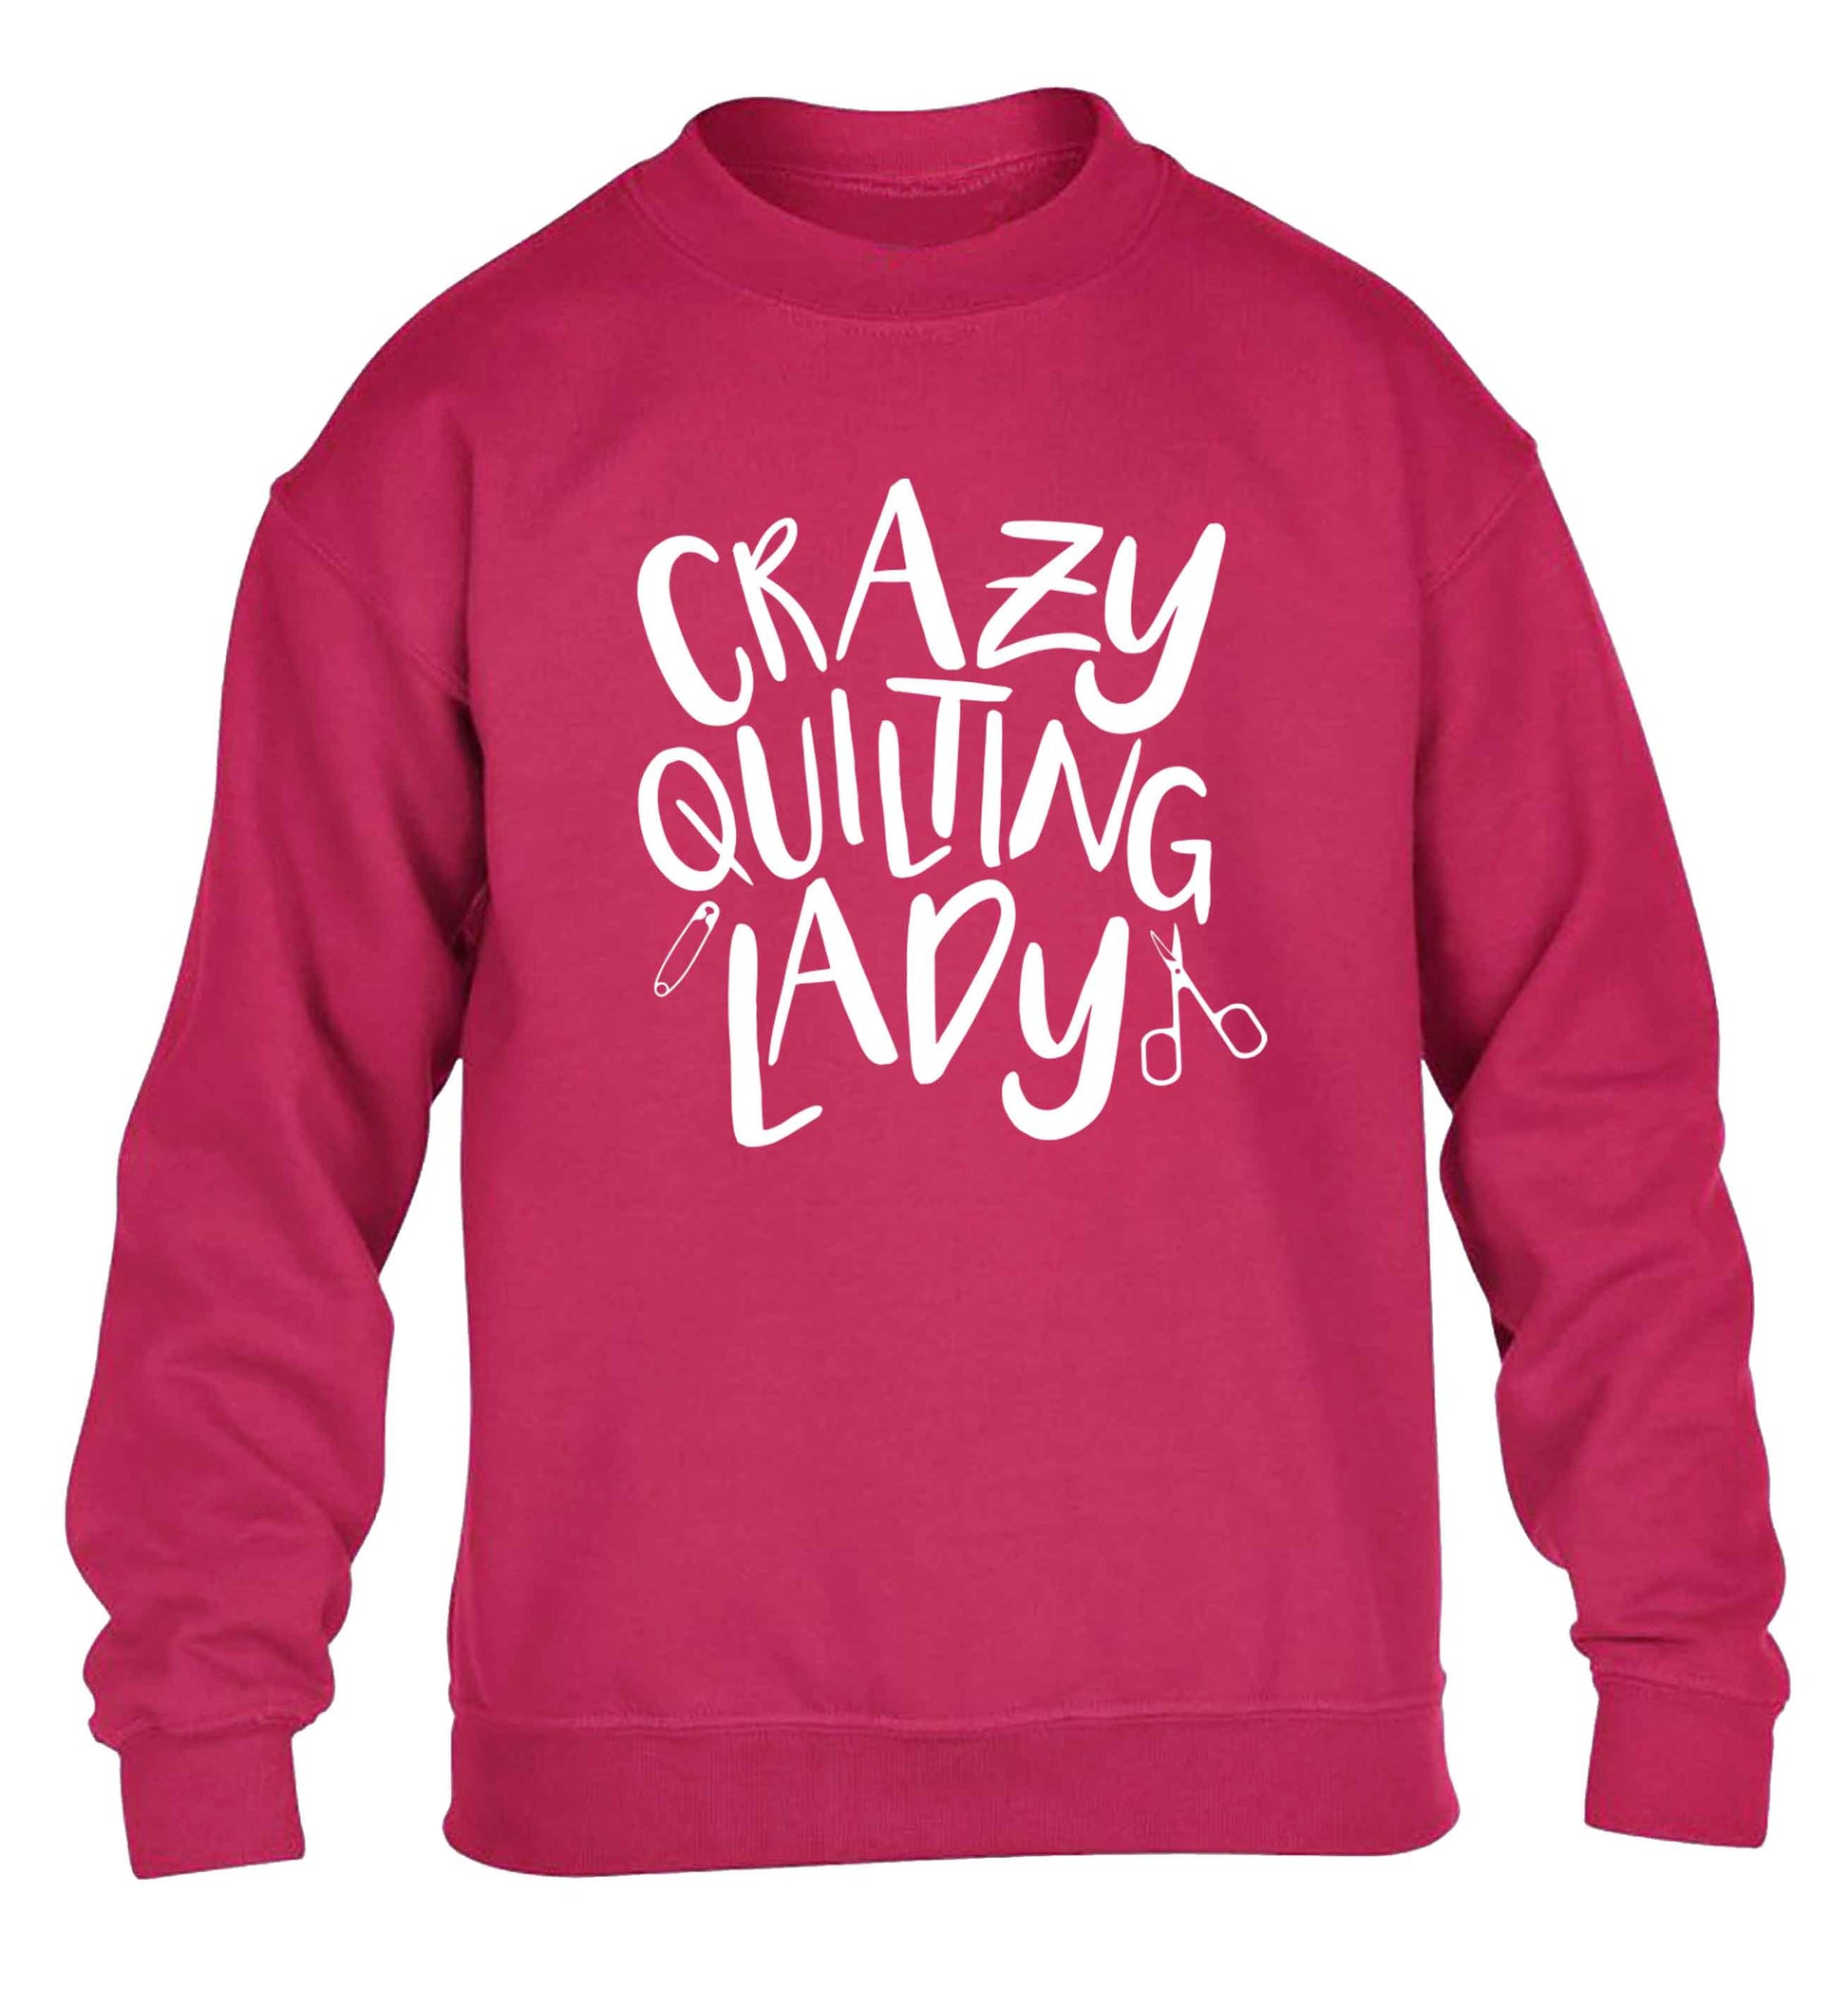 Crazy quilting lady children's pink sweater 12-13 Years